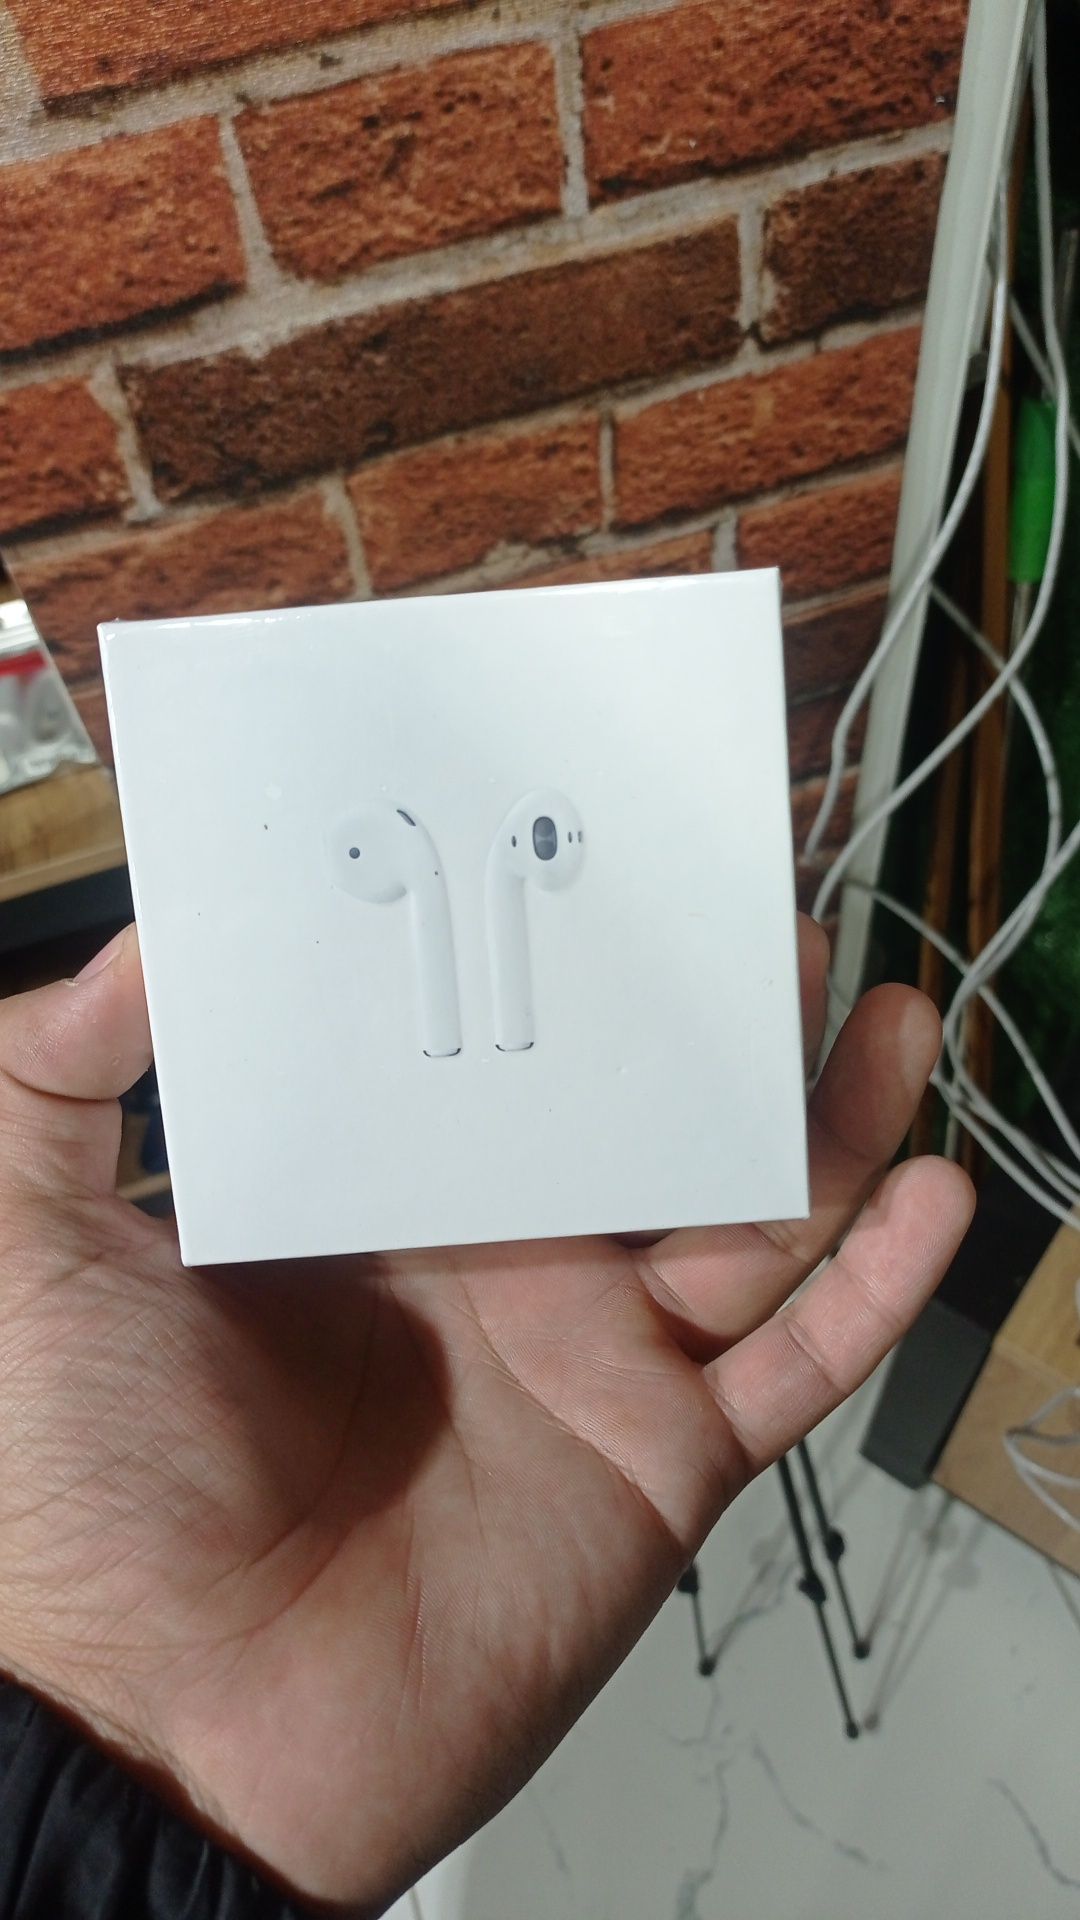 Apple watch+airpods